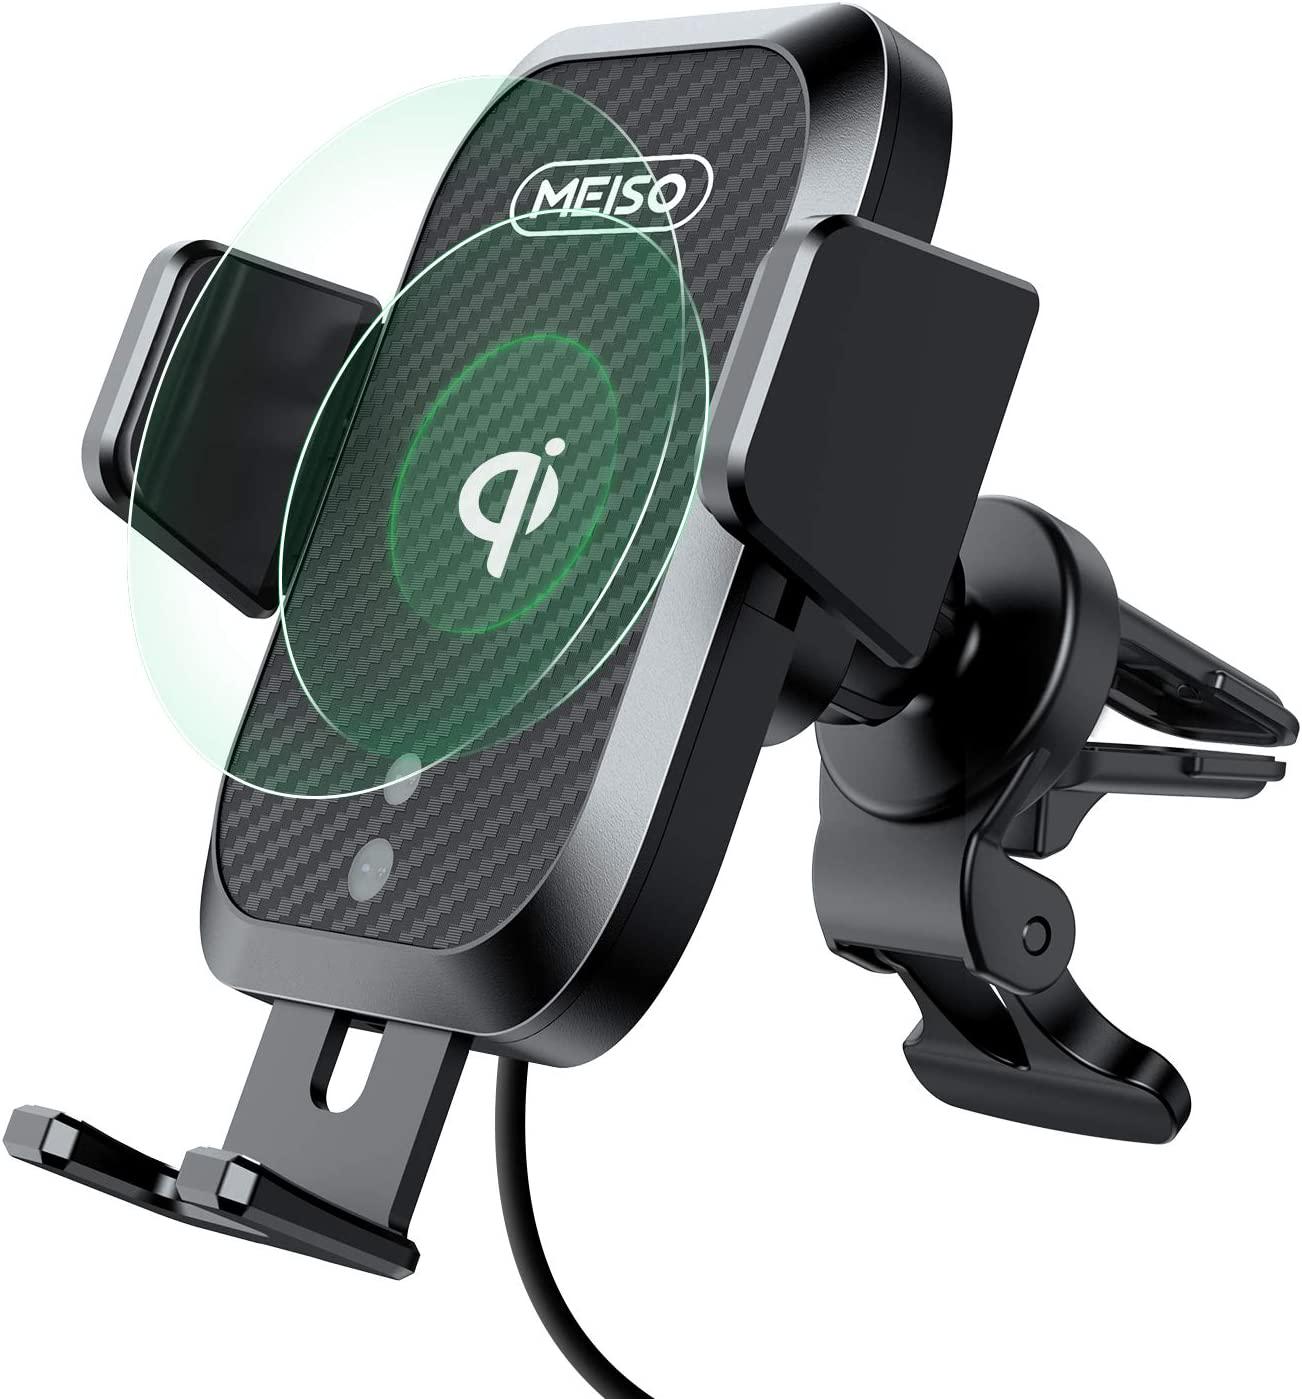 MEISO, MEISO Car Mount Wireless Charger, Auto Sense Phone Holder, 10W Qi Auto Clamping Air Vent Phone Holder Mount Compatible with iPhone 11, X, XR, 8, Samsung S20, Note10, S10, Note9, S9, LG, Pixel